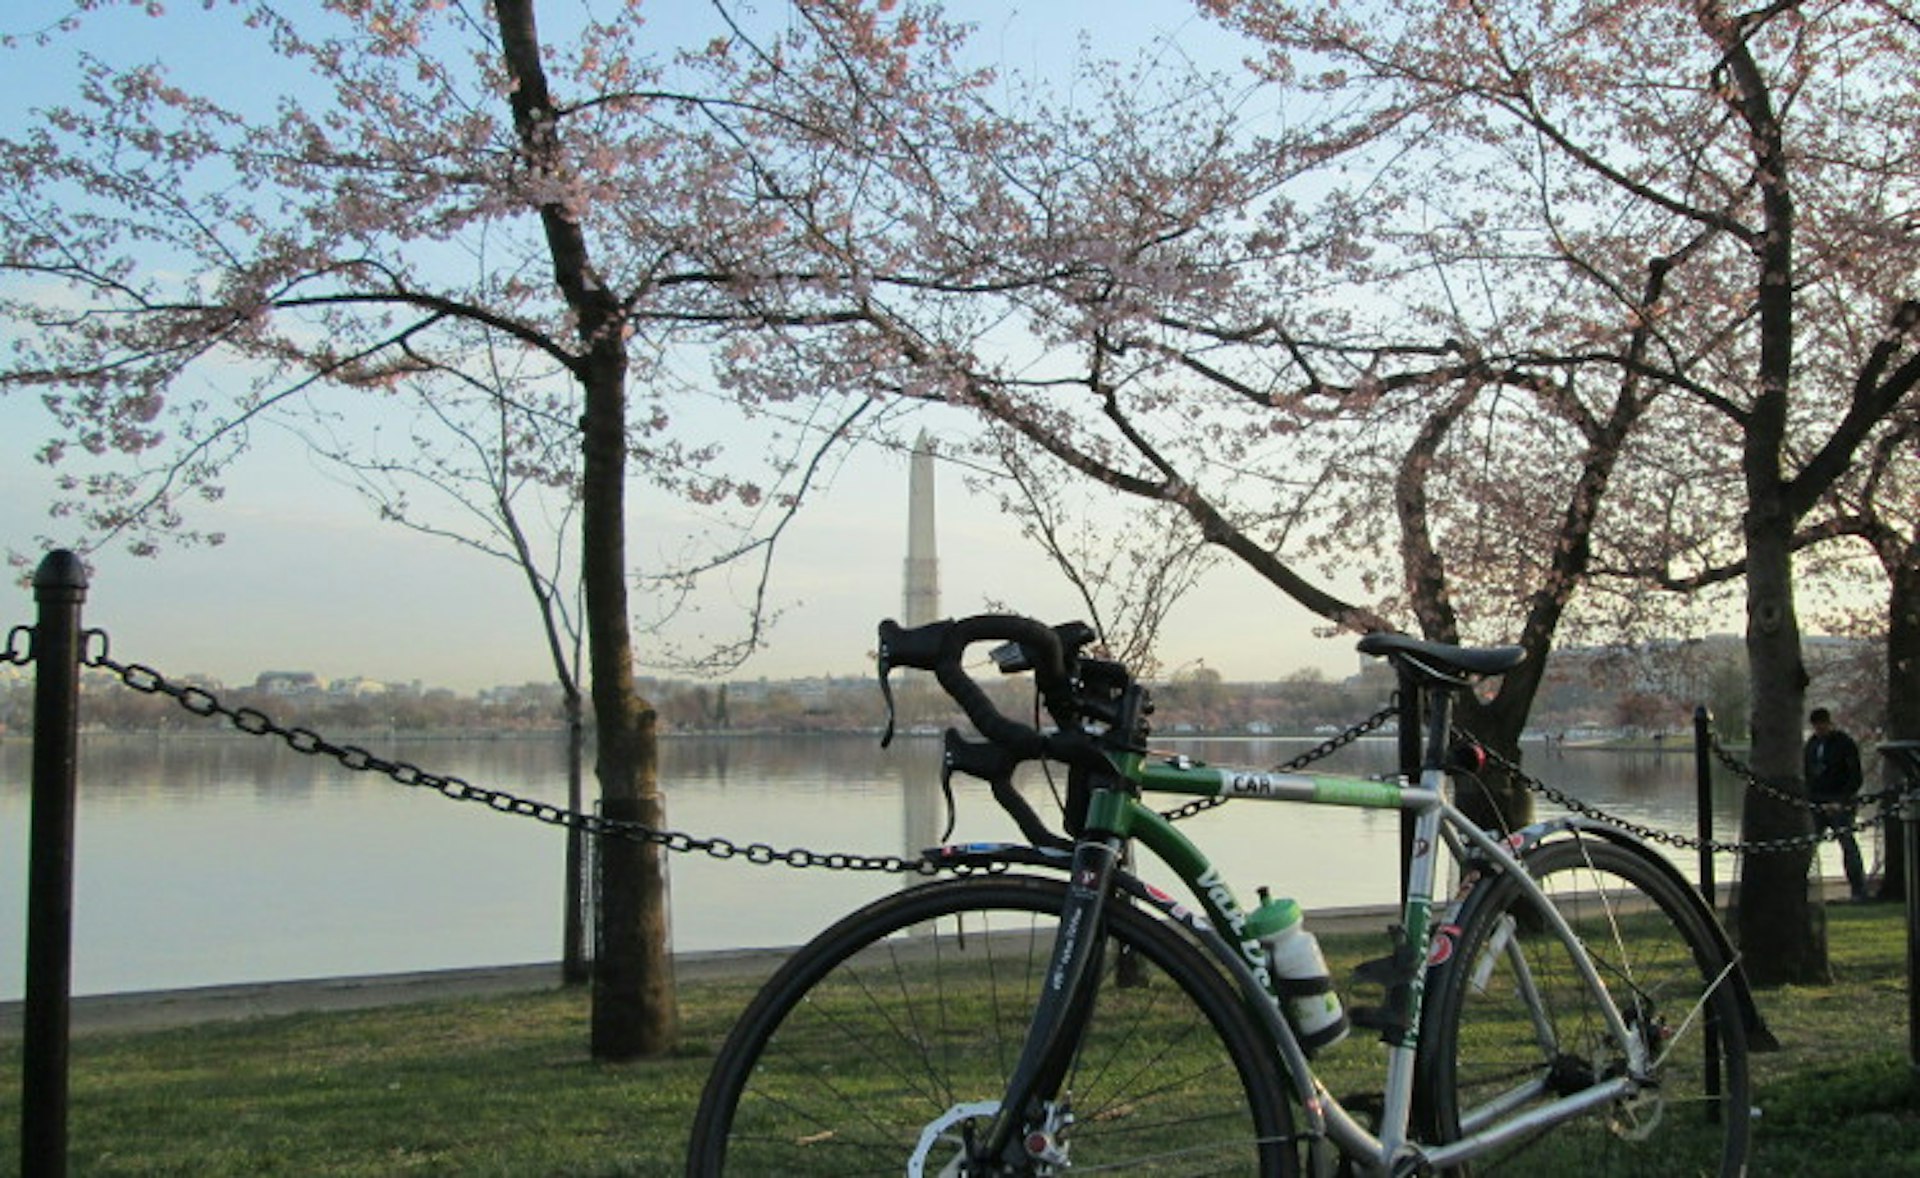 DC's bike trails and open-air monuments make it an ideal spot for some two-wheeled sightseeing. Image by BikeEveryDAy / CC BY 2.0